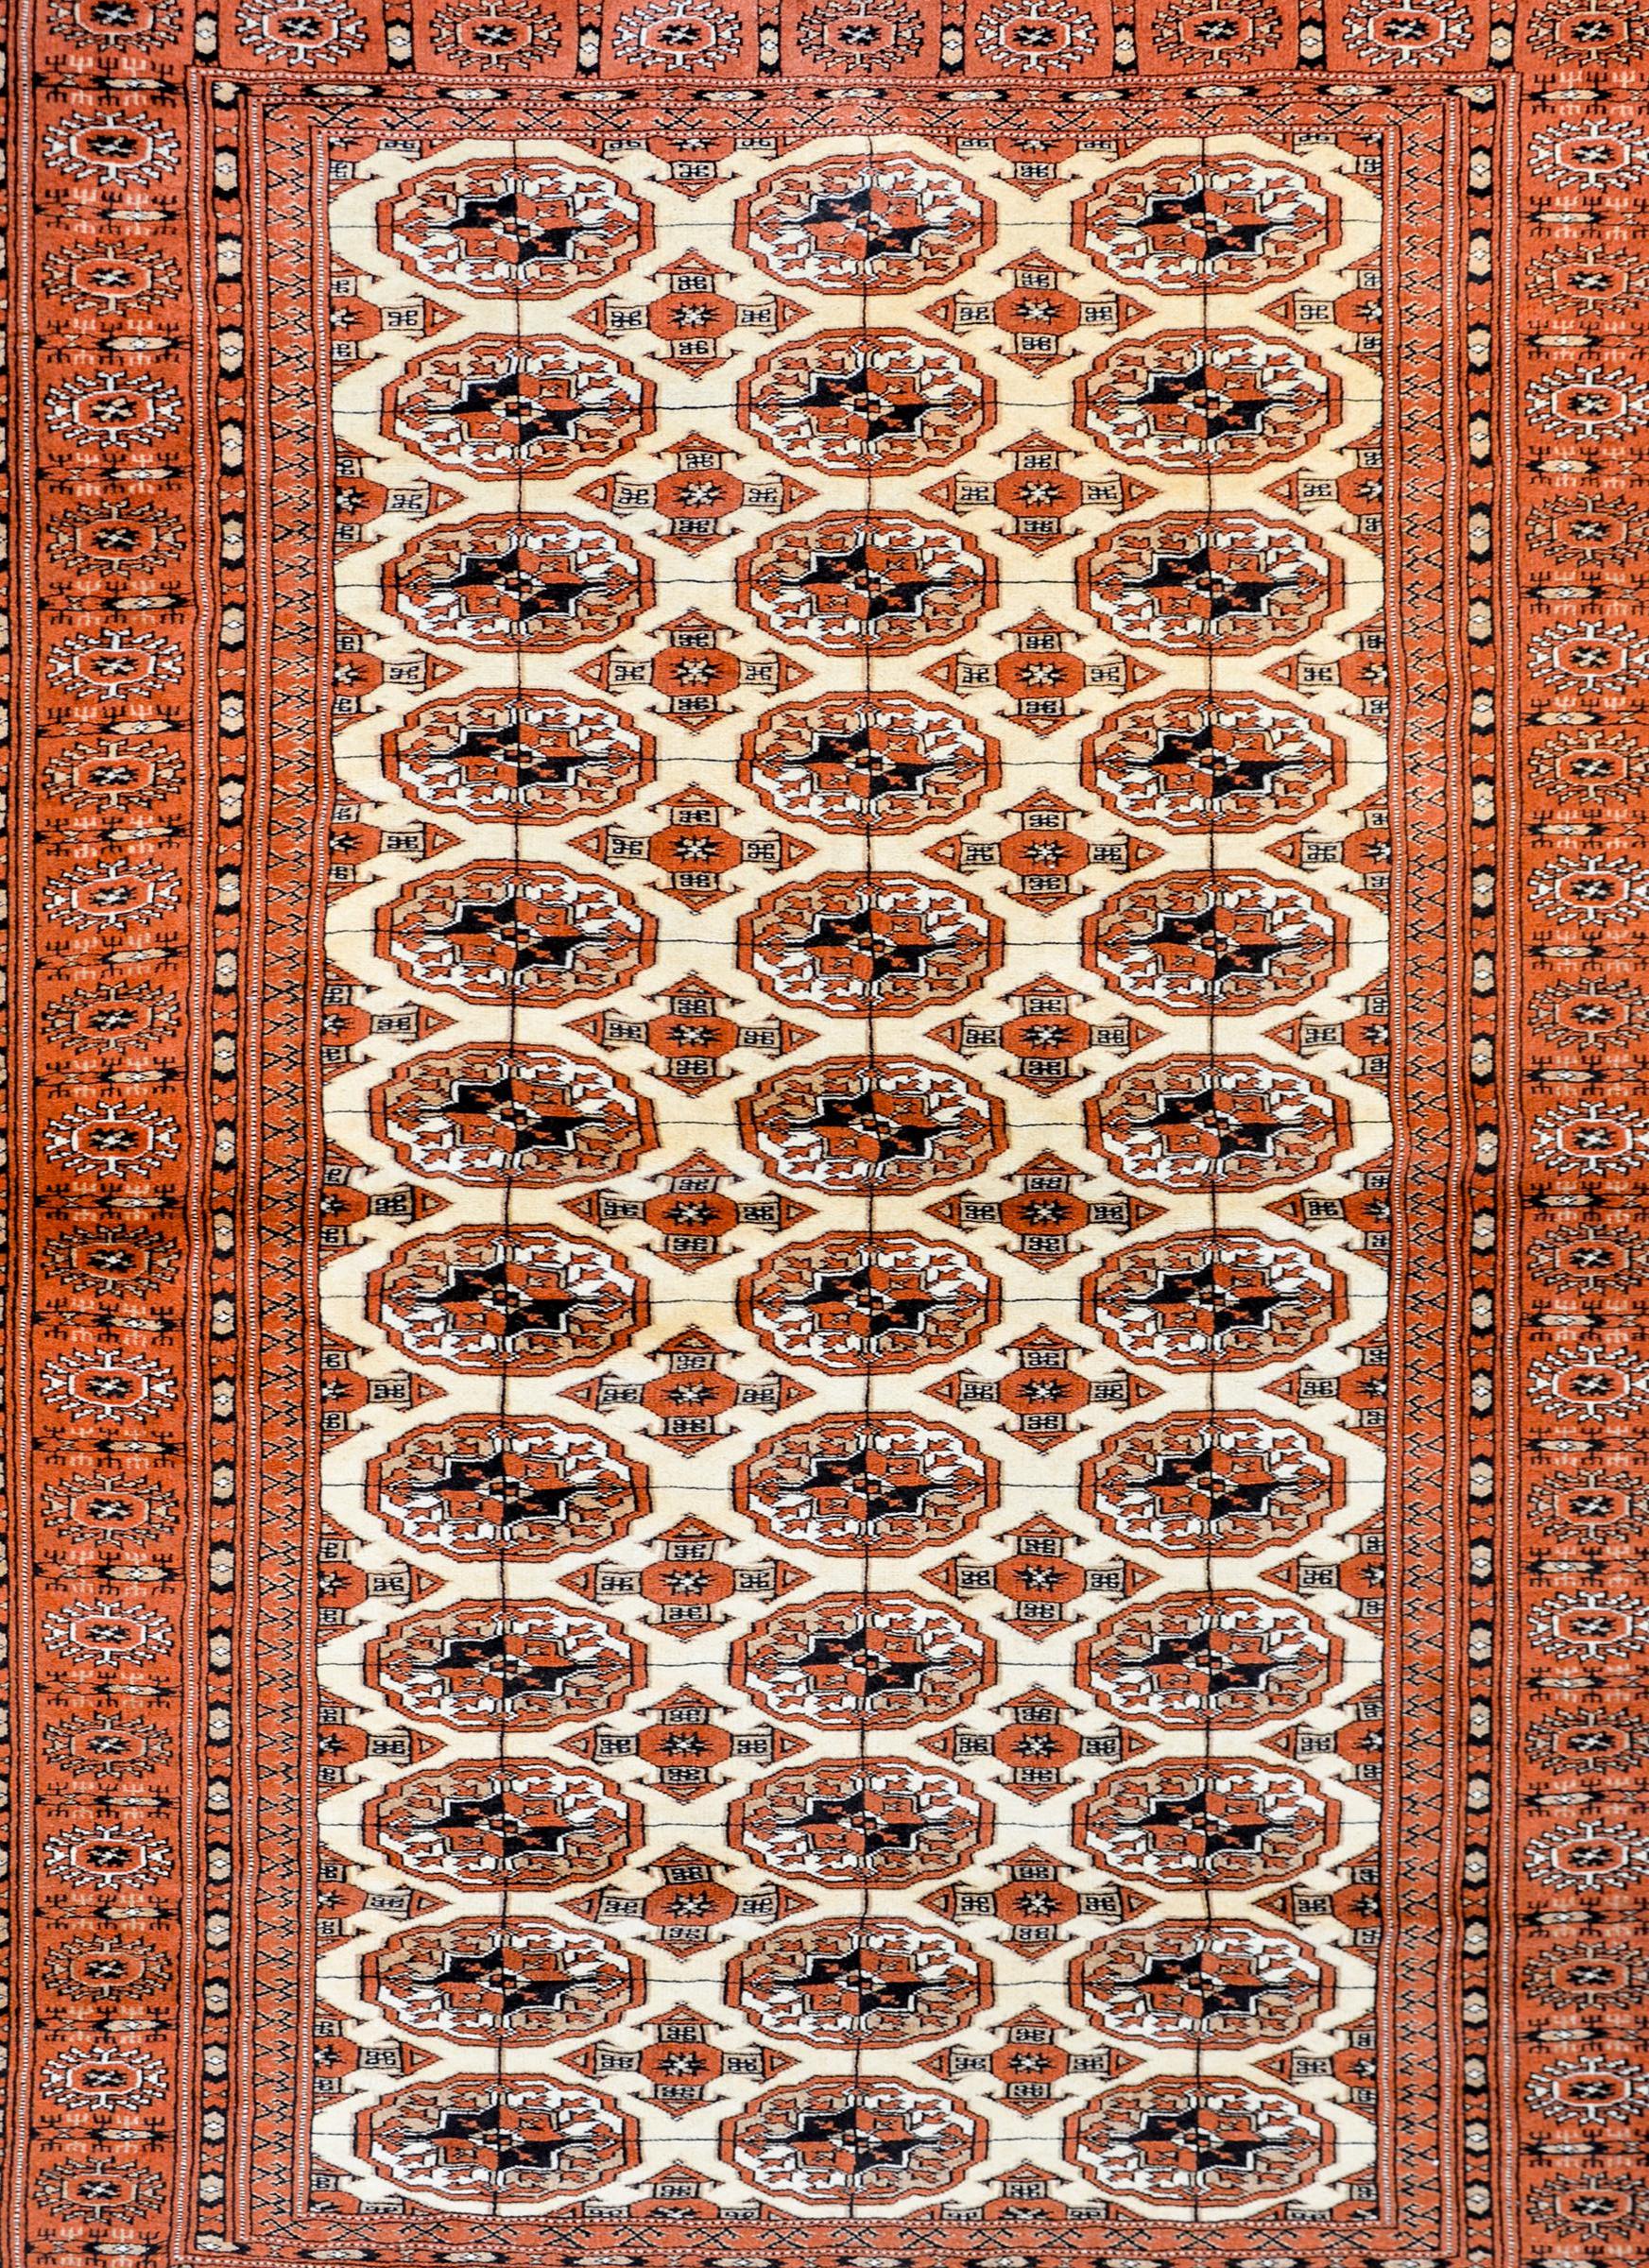 A fantastic vintage Persian Turkoman rug with an all-over field of floral medallions woven in white, cream, brown, and black colored wool surrounded by a wide border of multiple floral patterned stripes.